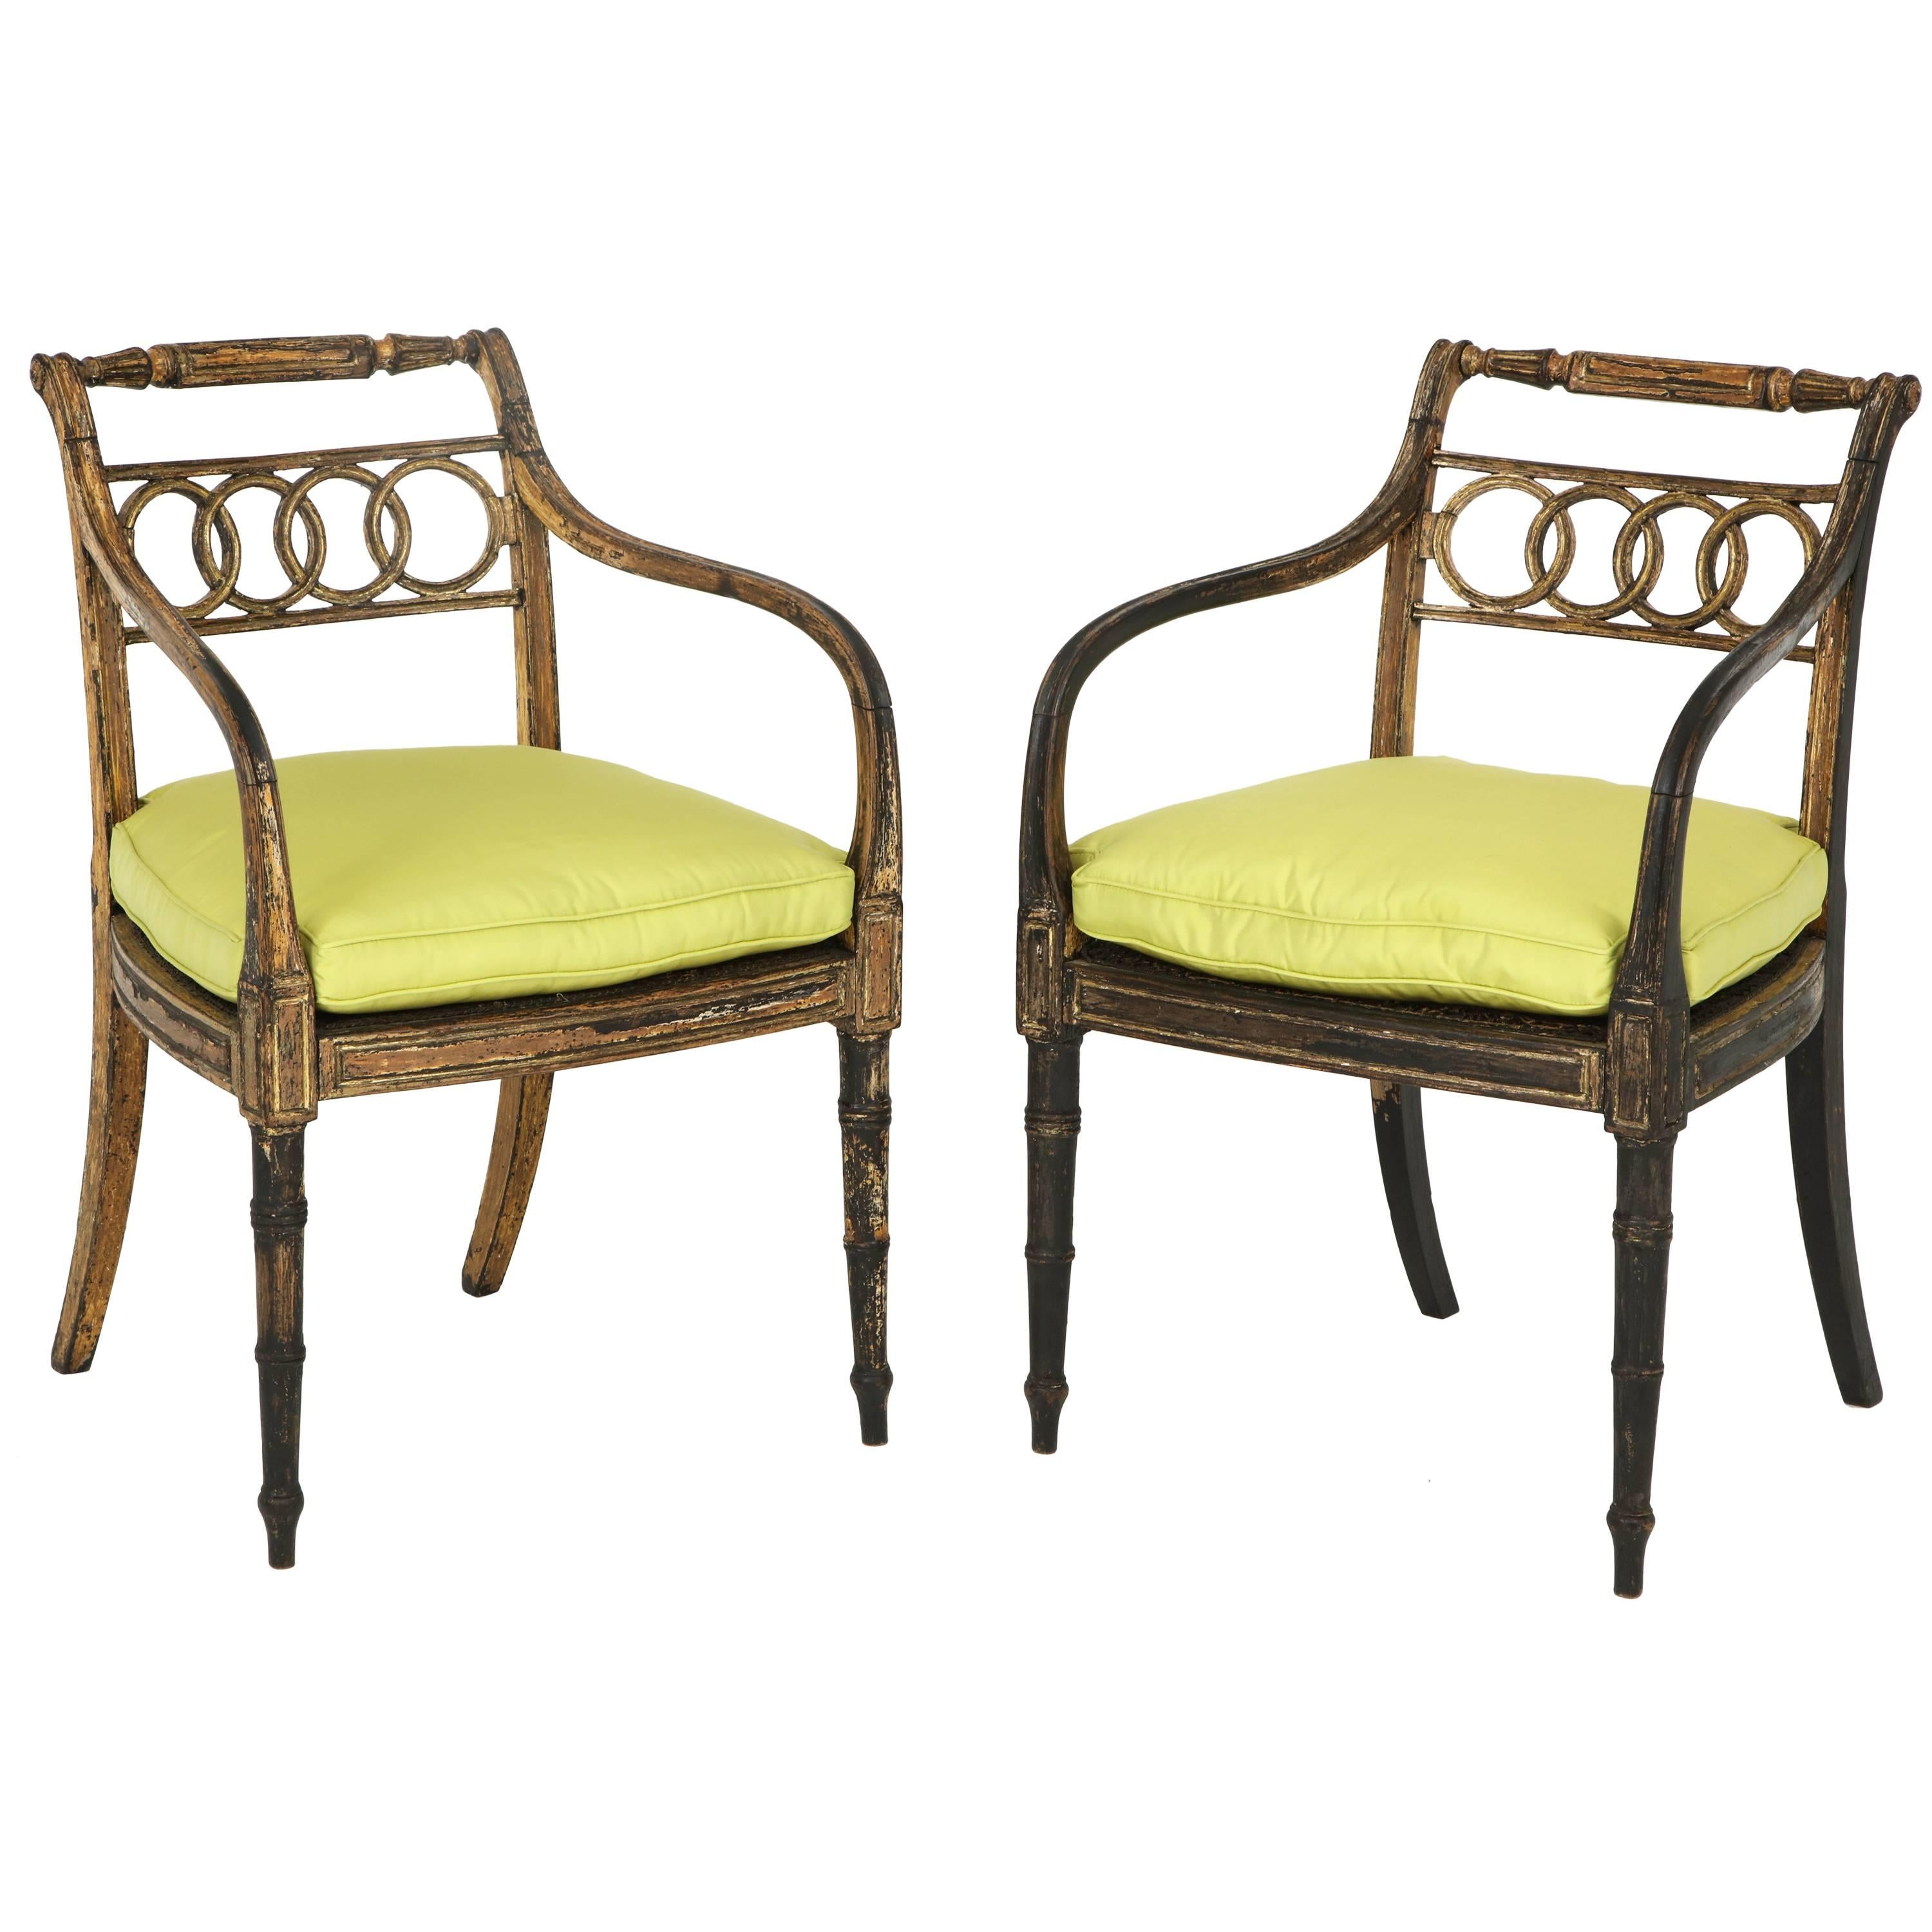 Pair of English Regency Painted and Parcel-Gilt Side Chairs